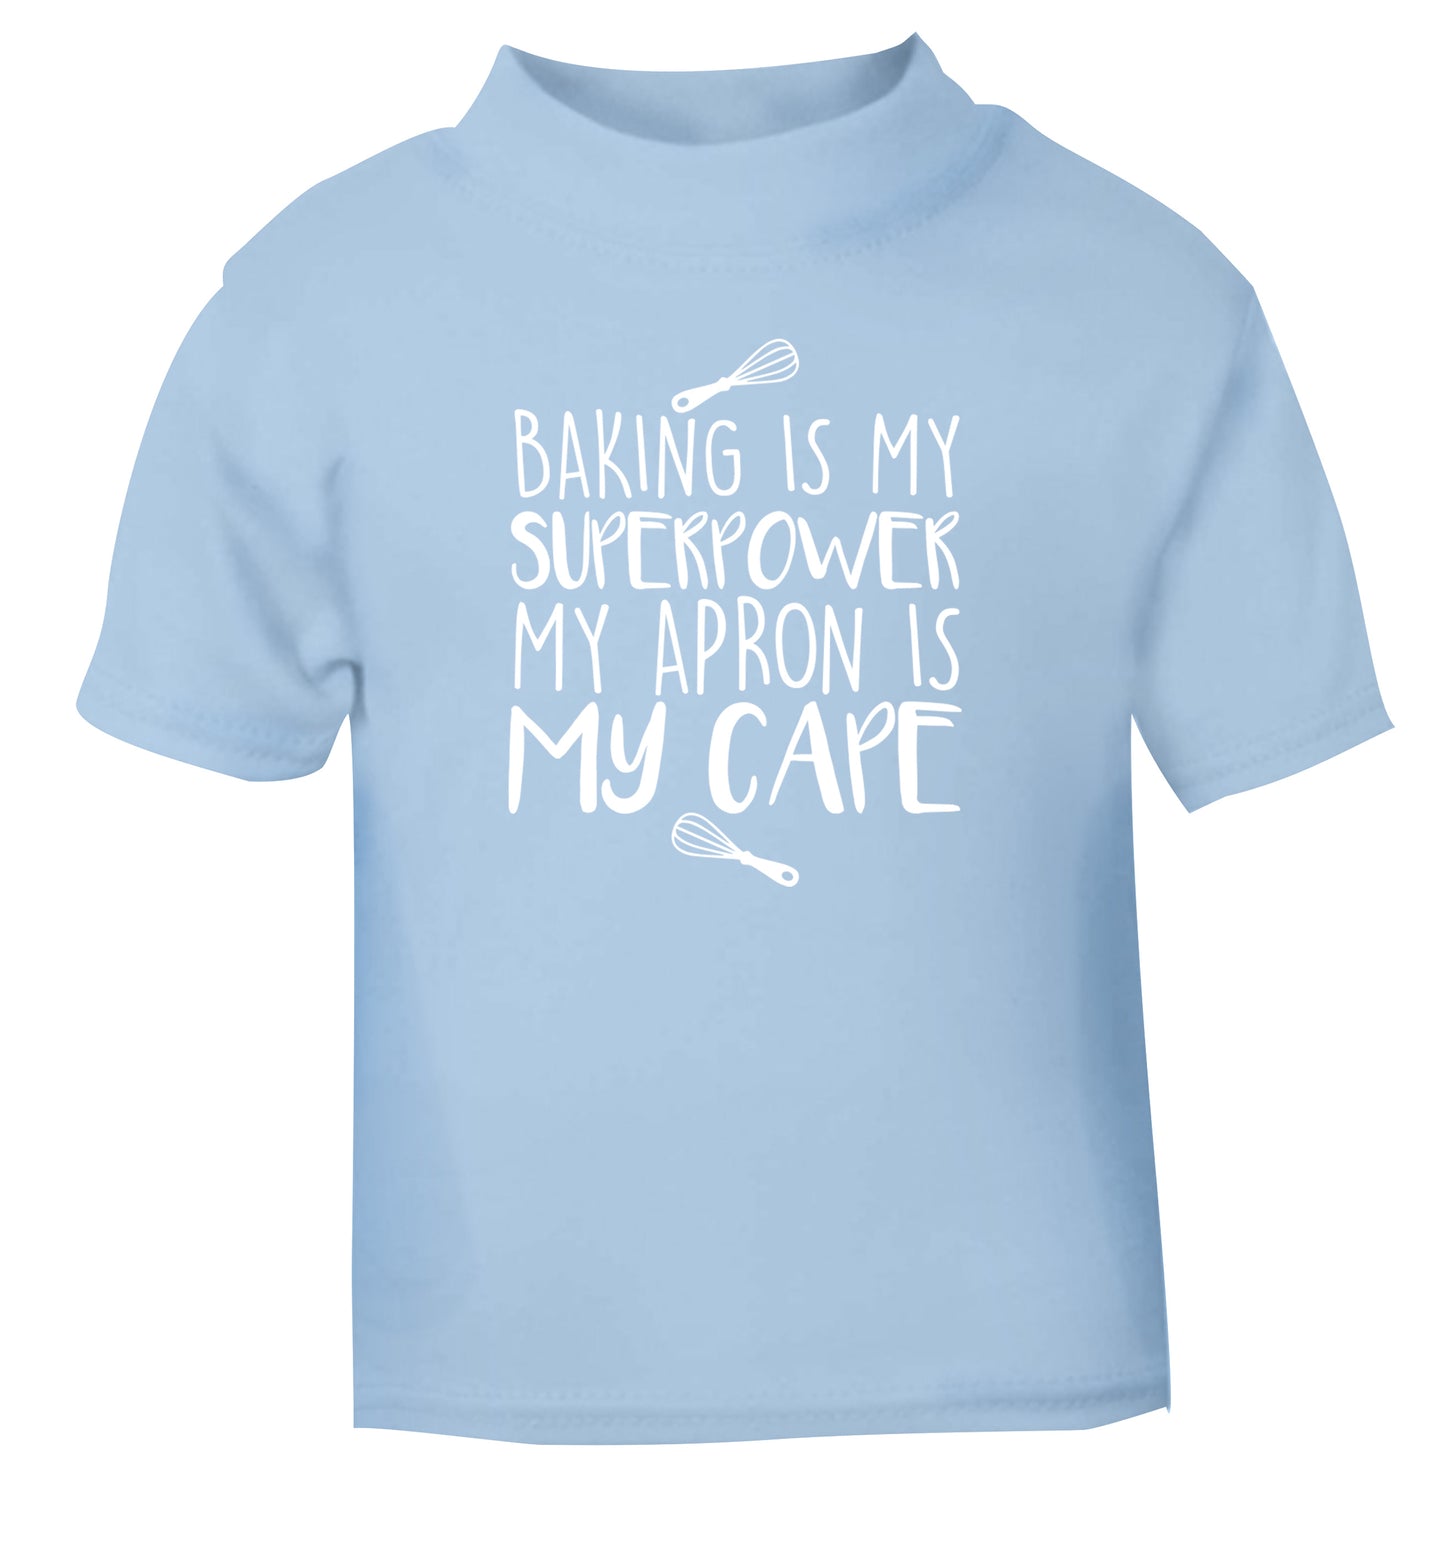 Baking is my superpower my apron is my cape light blue Baby Toddler Tshirt 2 Years